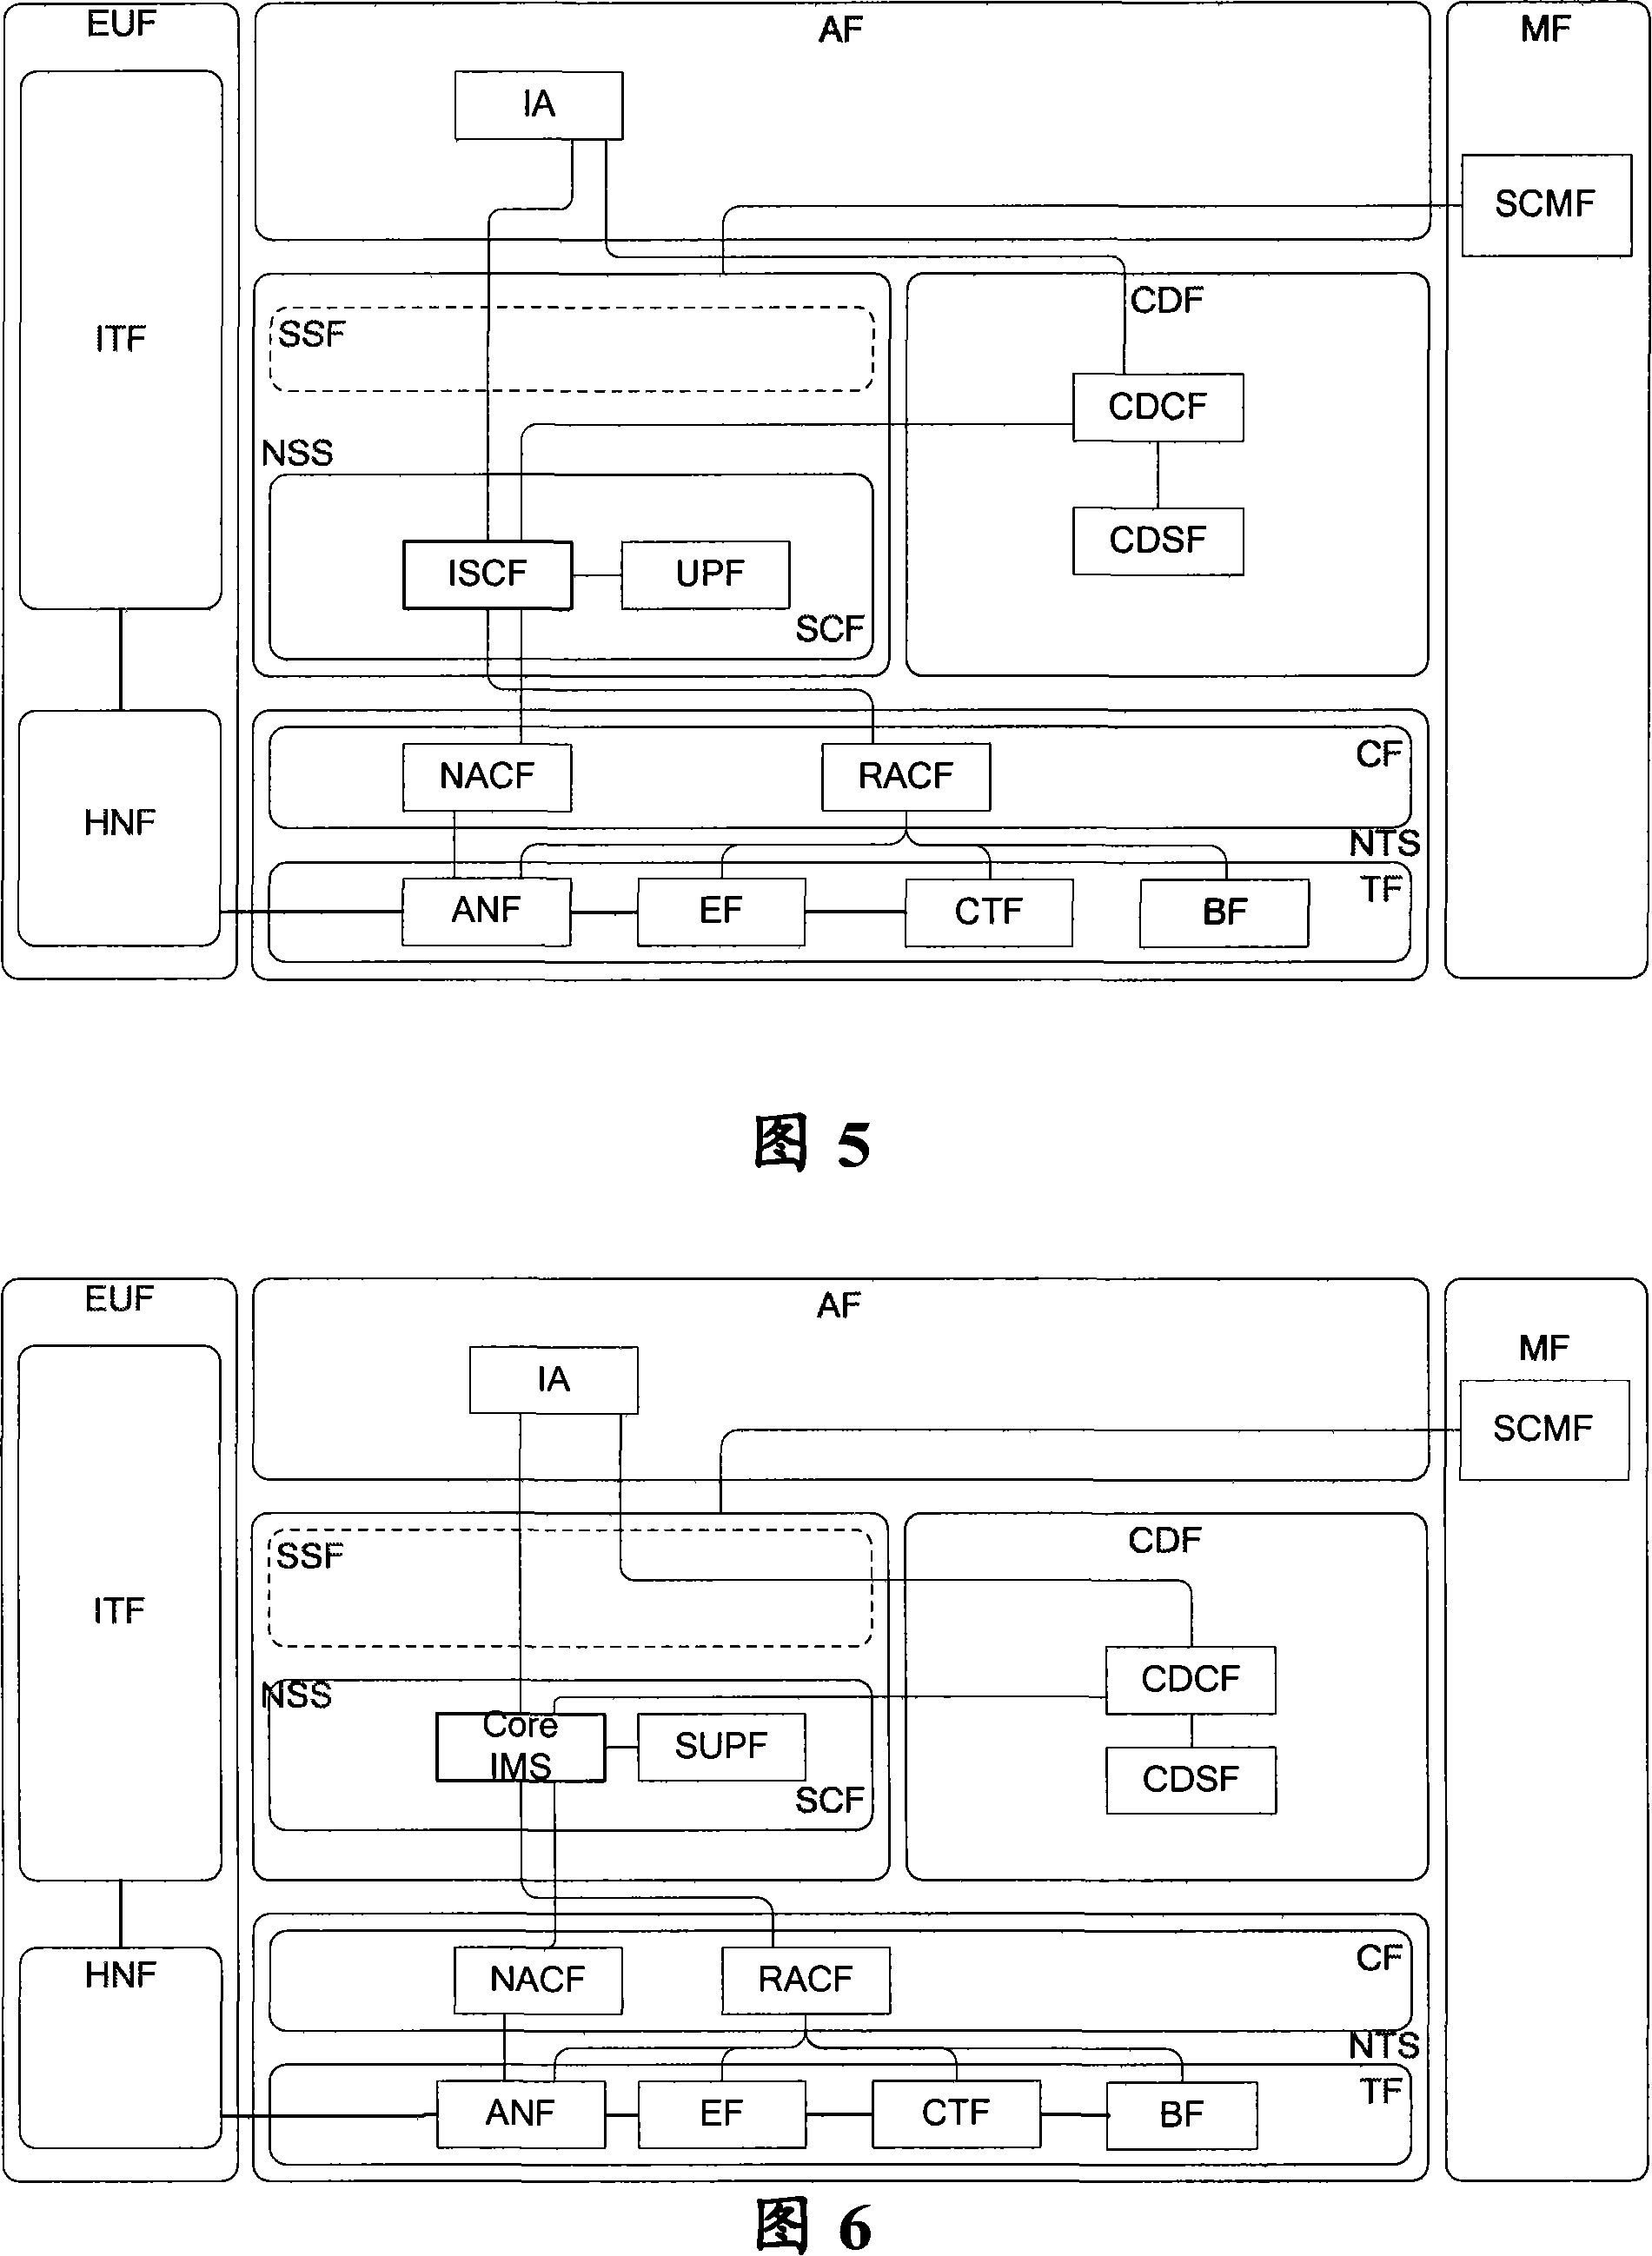 IPTV network interconnection architecture and interconnection method